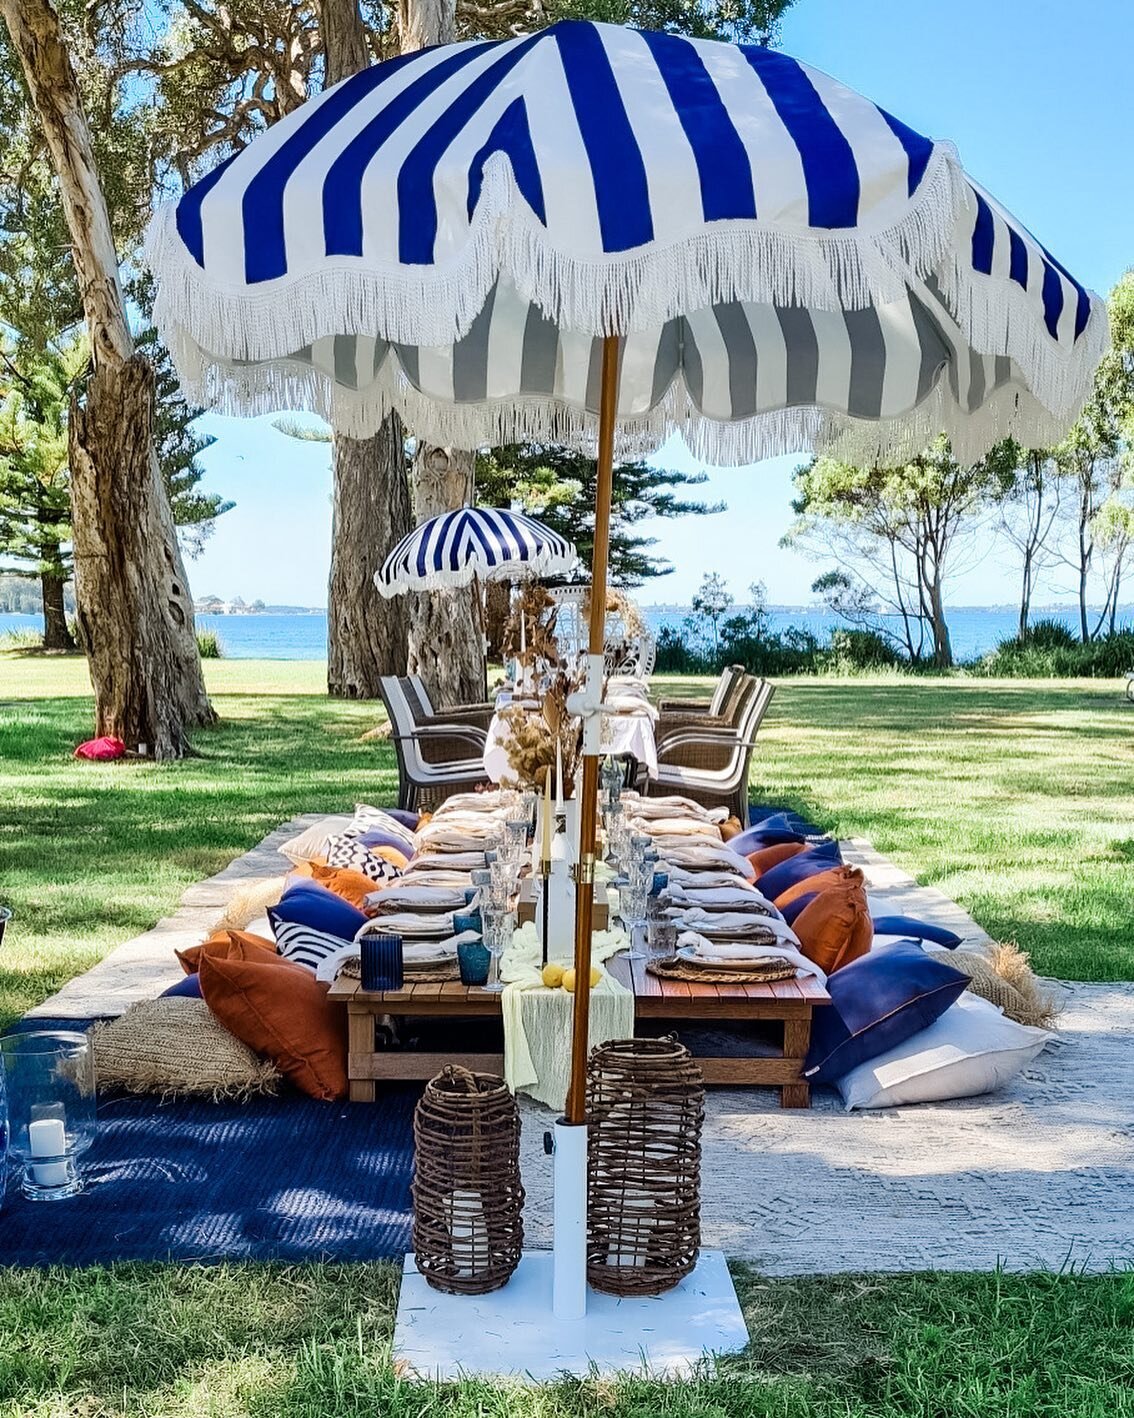 It&rsquo;s been another week of beautiful events, including this #AmalfiAzure luxury picnic for a lovely lady&rsquo;s 80th birthday. Bellissima! 🍋🍋🍋

Enquiries: hello@luxelakeside.com.au 

LL x

🏷️
#luxurypicnic #luxurypicnics #luxurypicnicservic